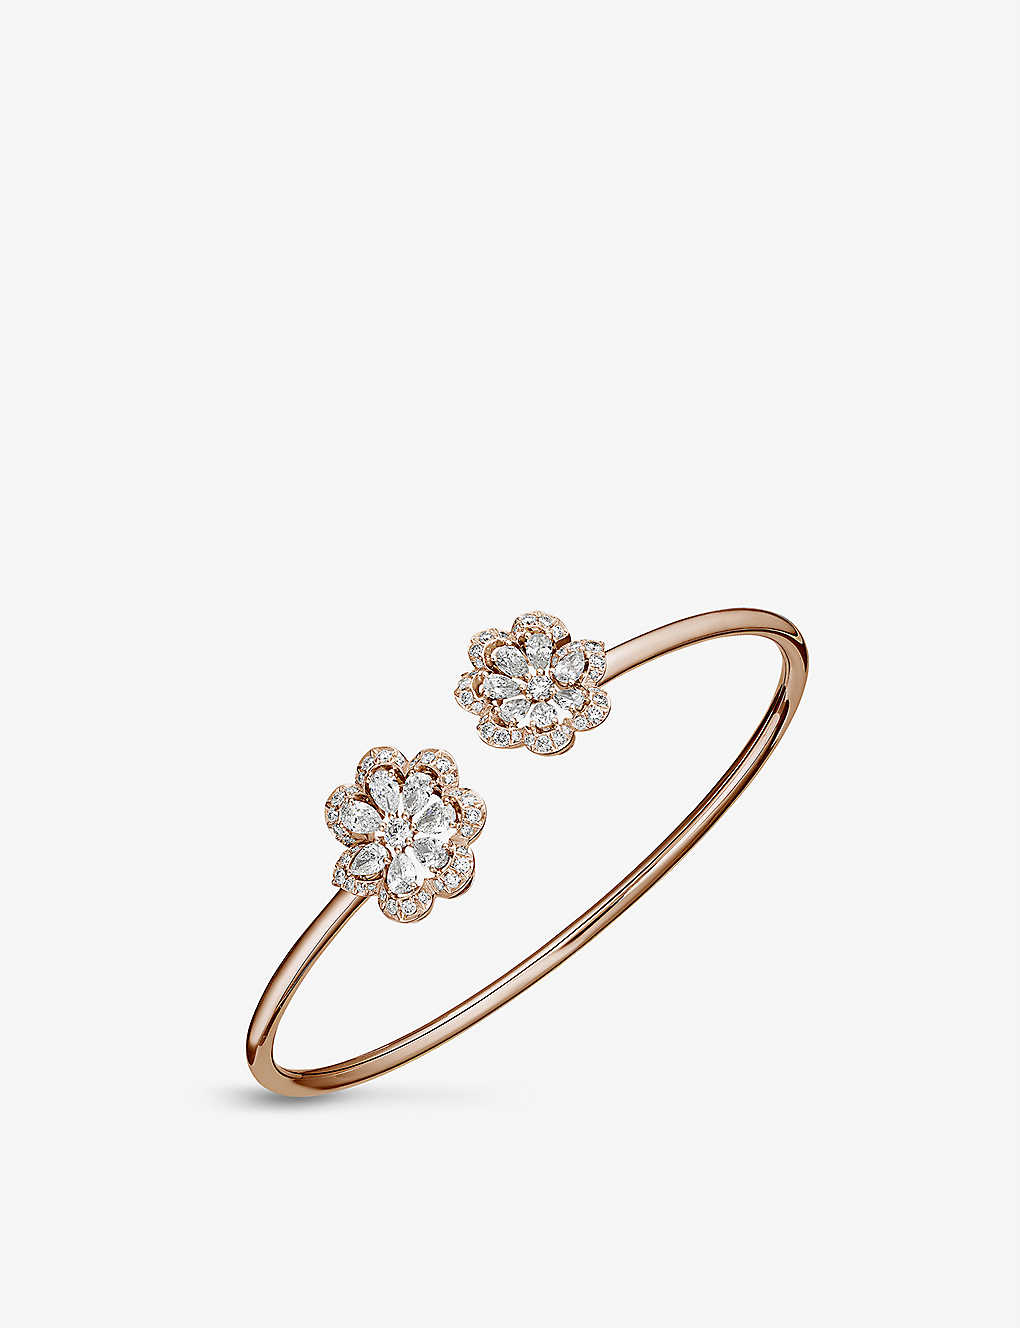 Chopard Precious Lace Frou-frou 18ct Rose-gold And 1.85ct Round-cut Diamond Bangle In Ethical Rose Gold